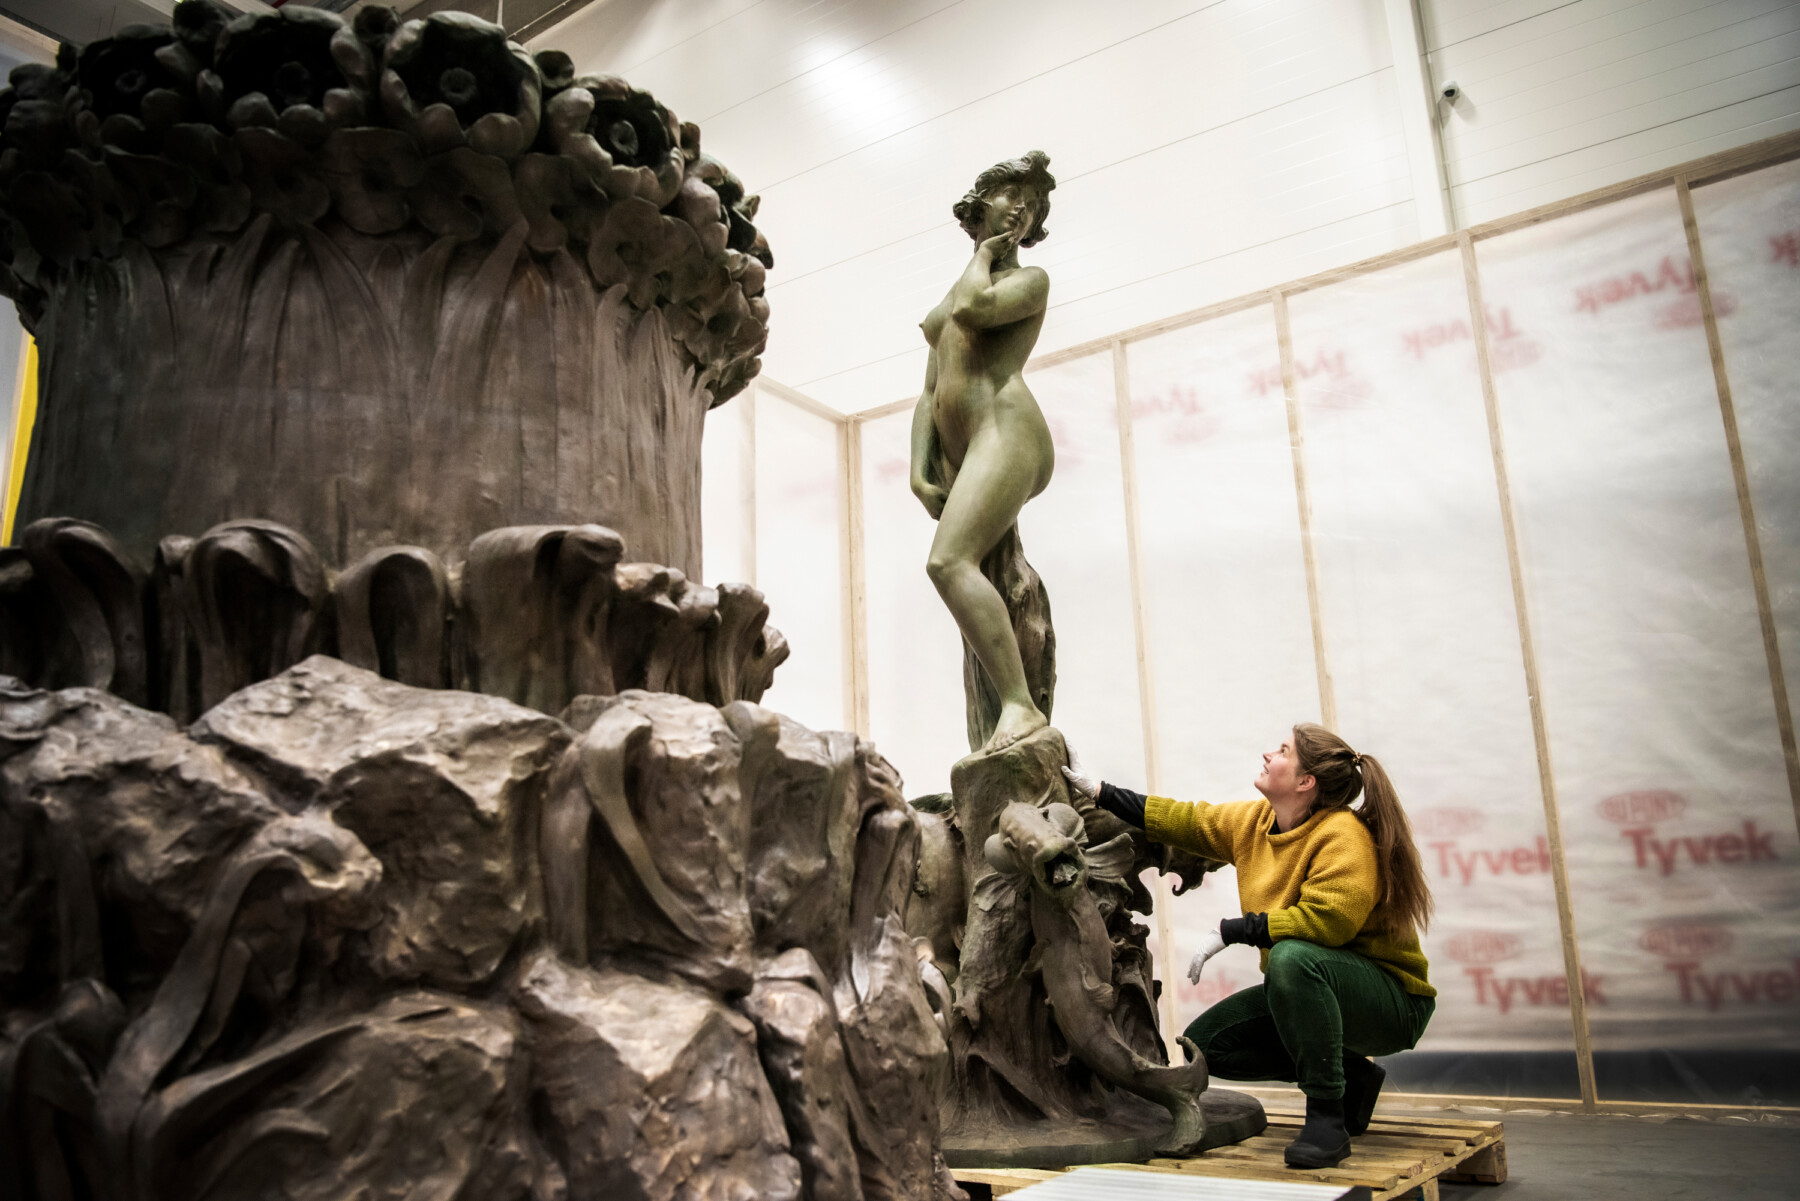 A woman kneels to look at the base of a statue in a workshop in front of a metal statue of a female figure.